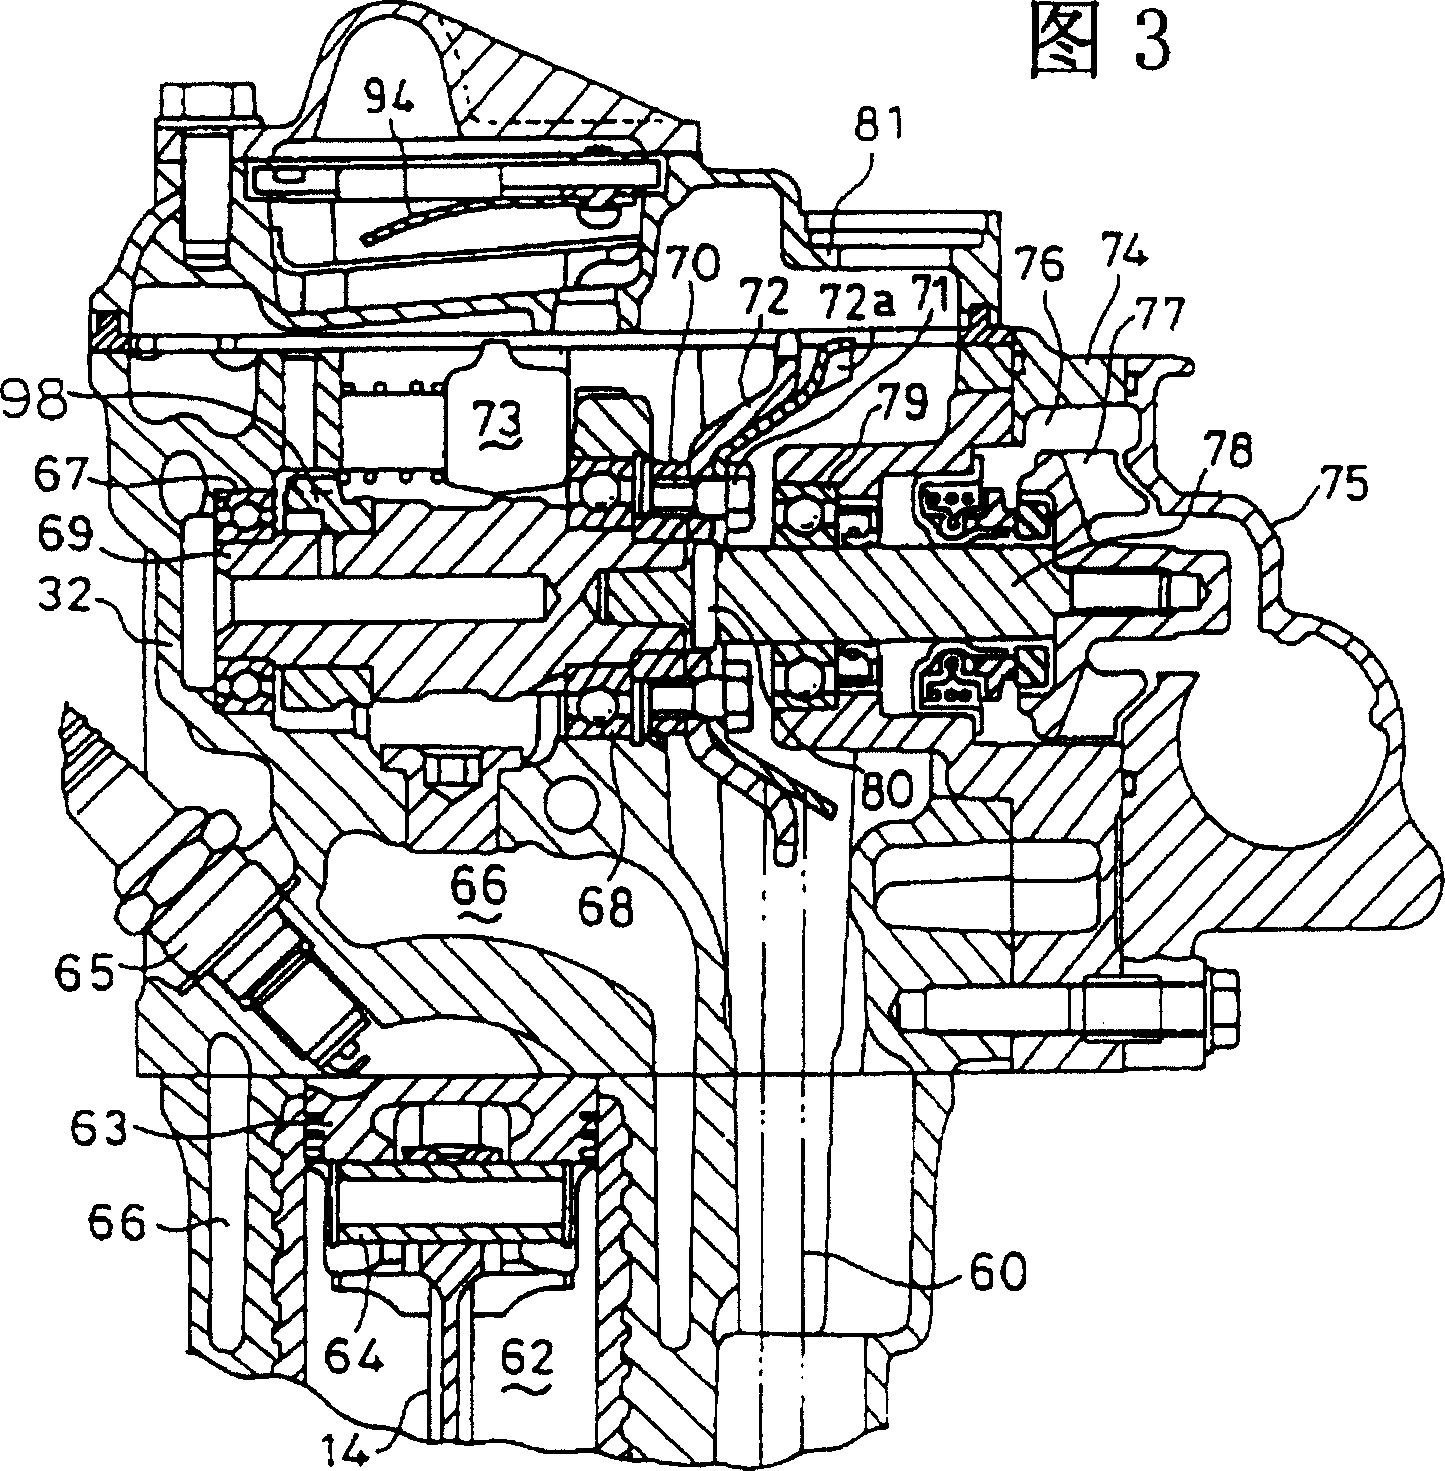 Actuating and generating device for vehicles